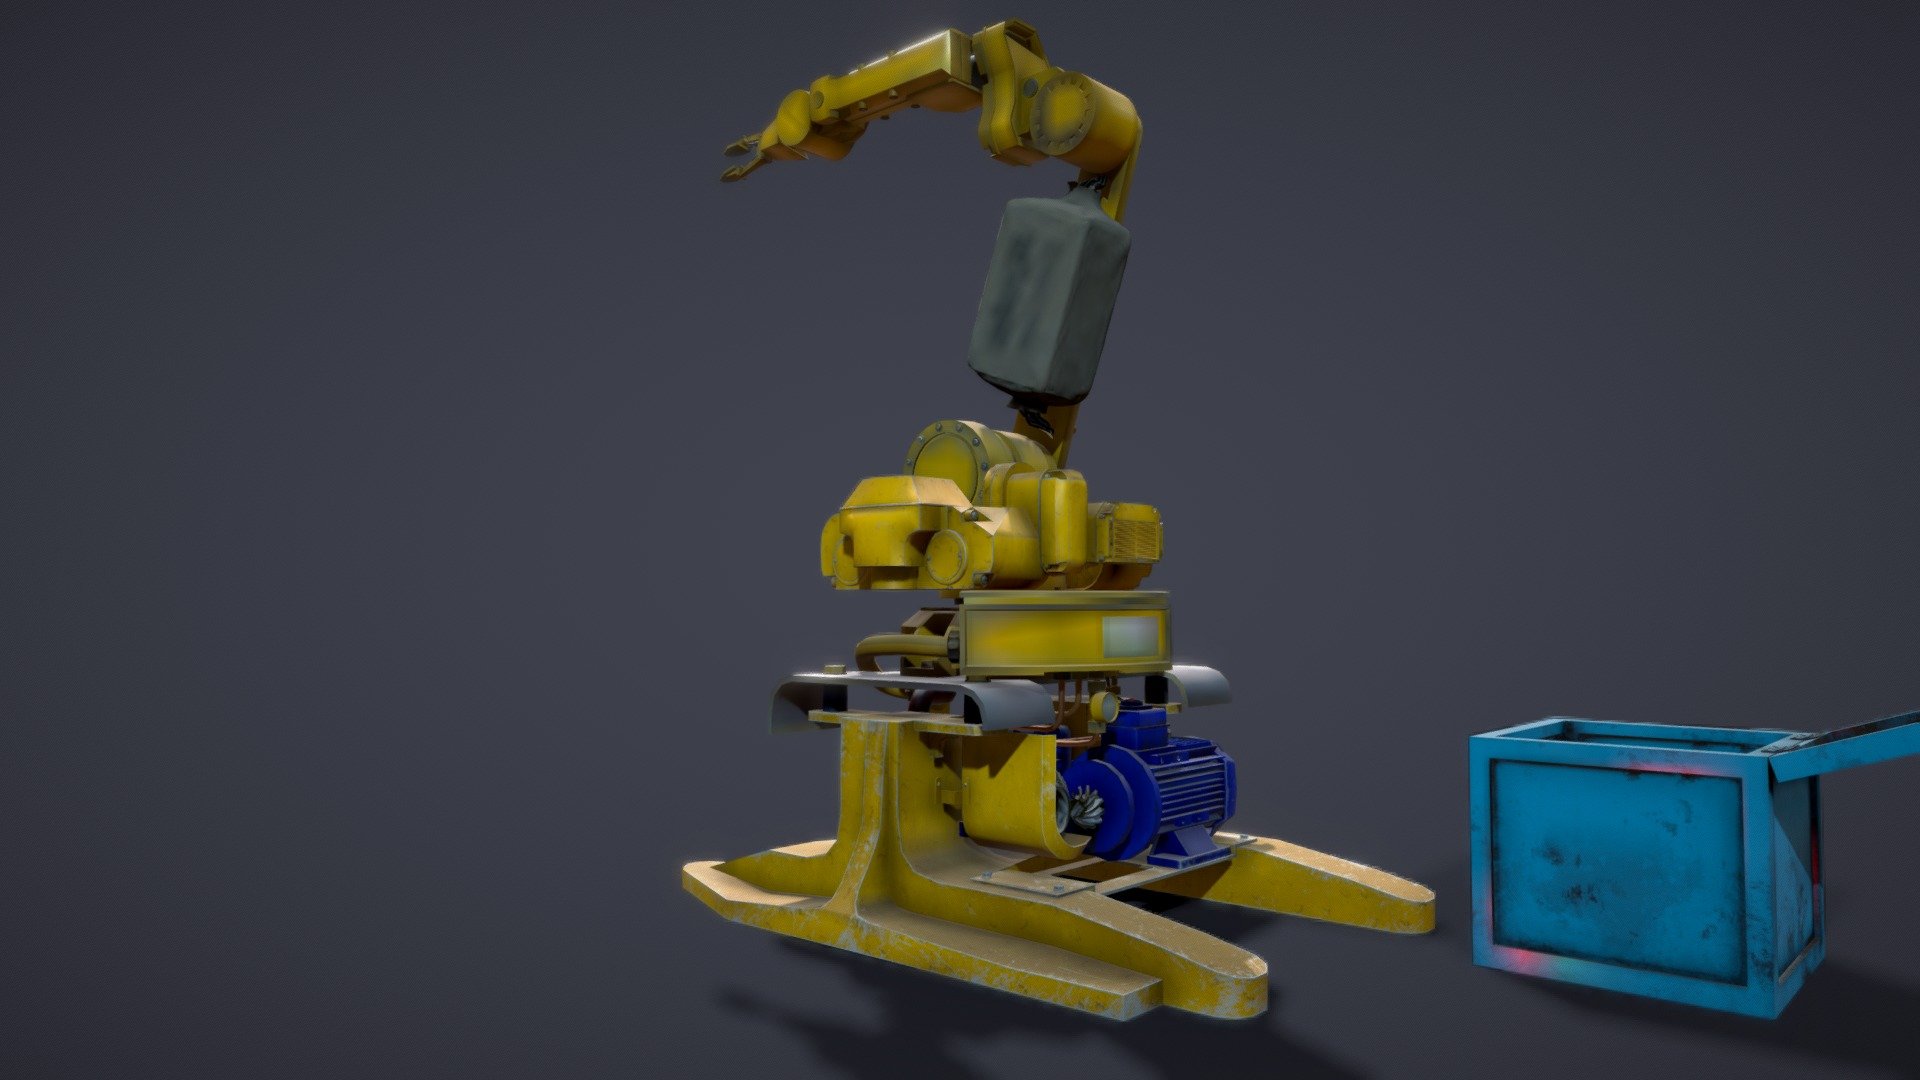 Animated industrial manipulator - optimized for AR, mobile.

The robotic arm is used for multiple industrial applications, from welding, material handling, and thermal spraying, to painting and drilling. The robotic technology also provides human-like dexterity in a variety of environments 3d model